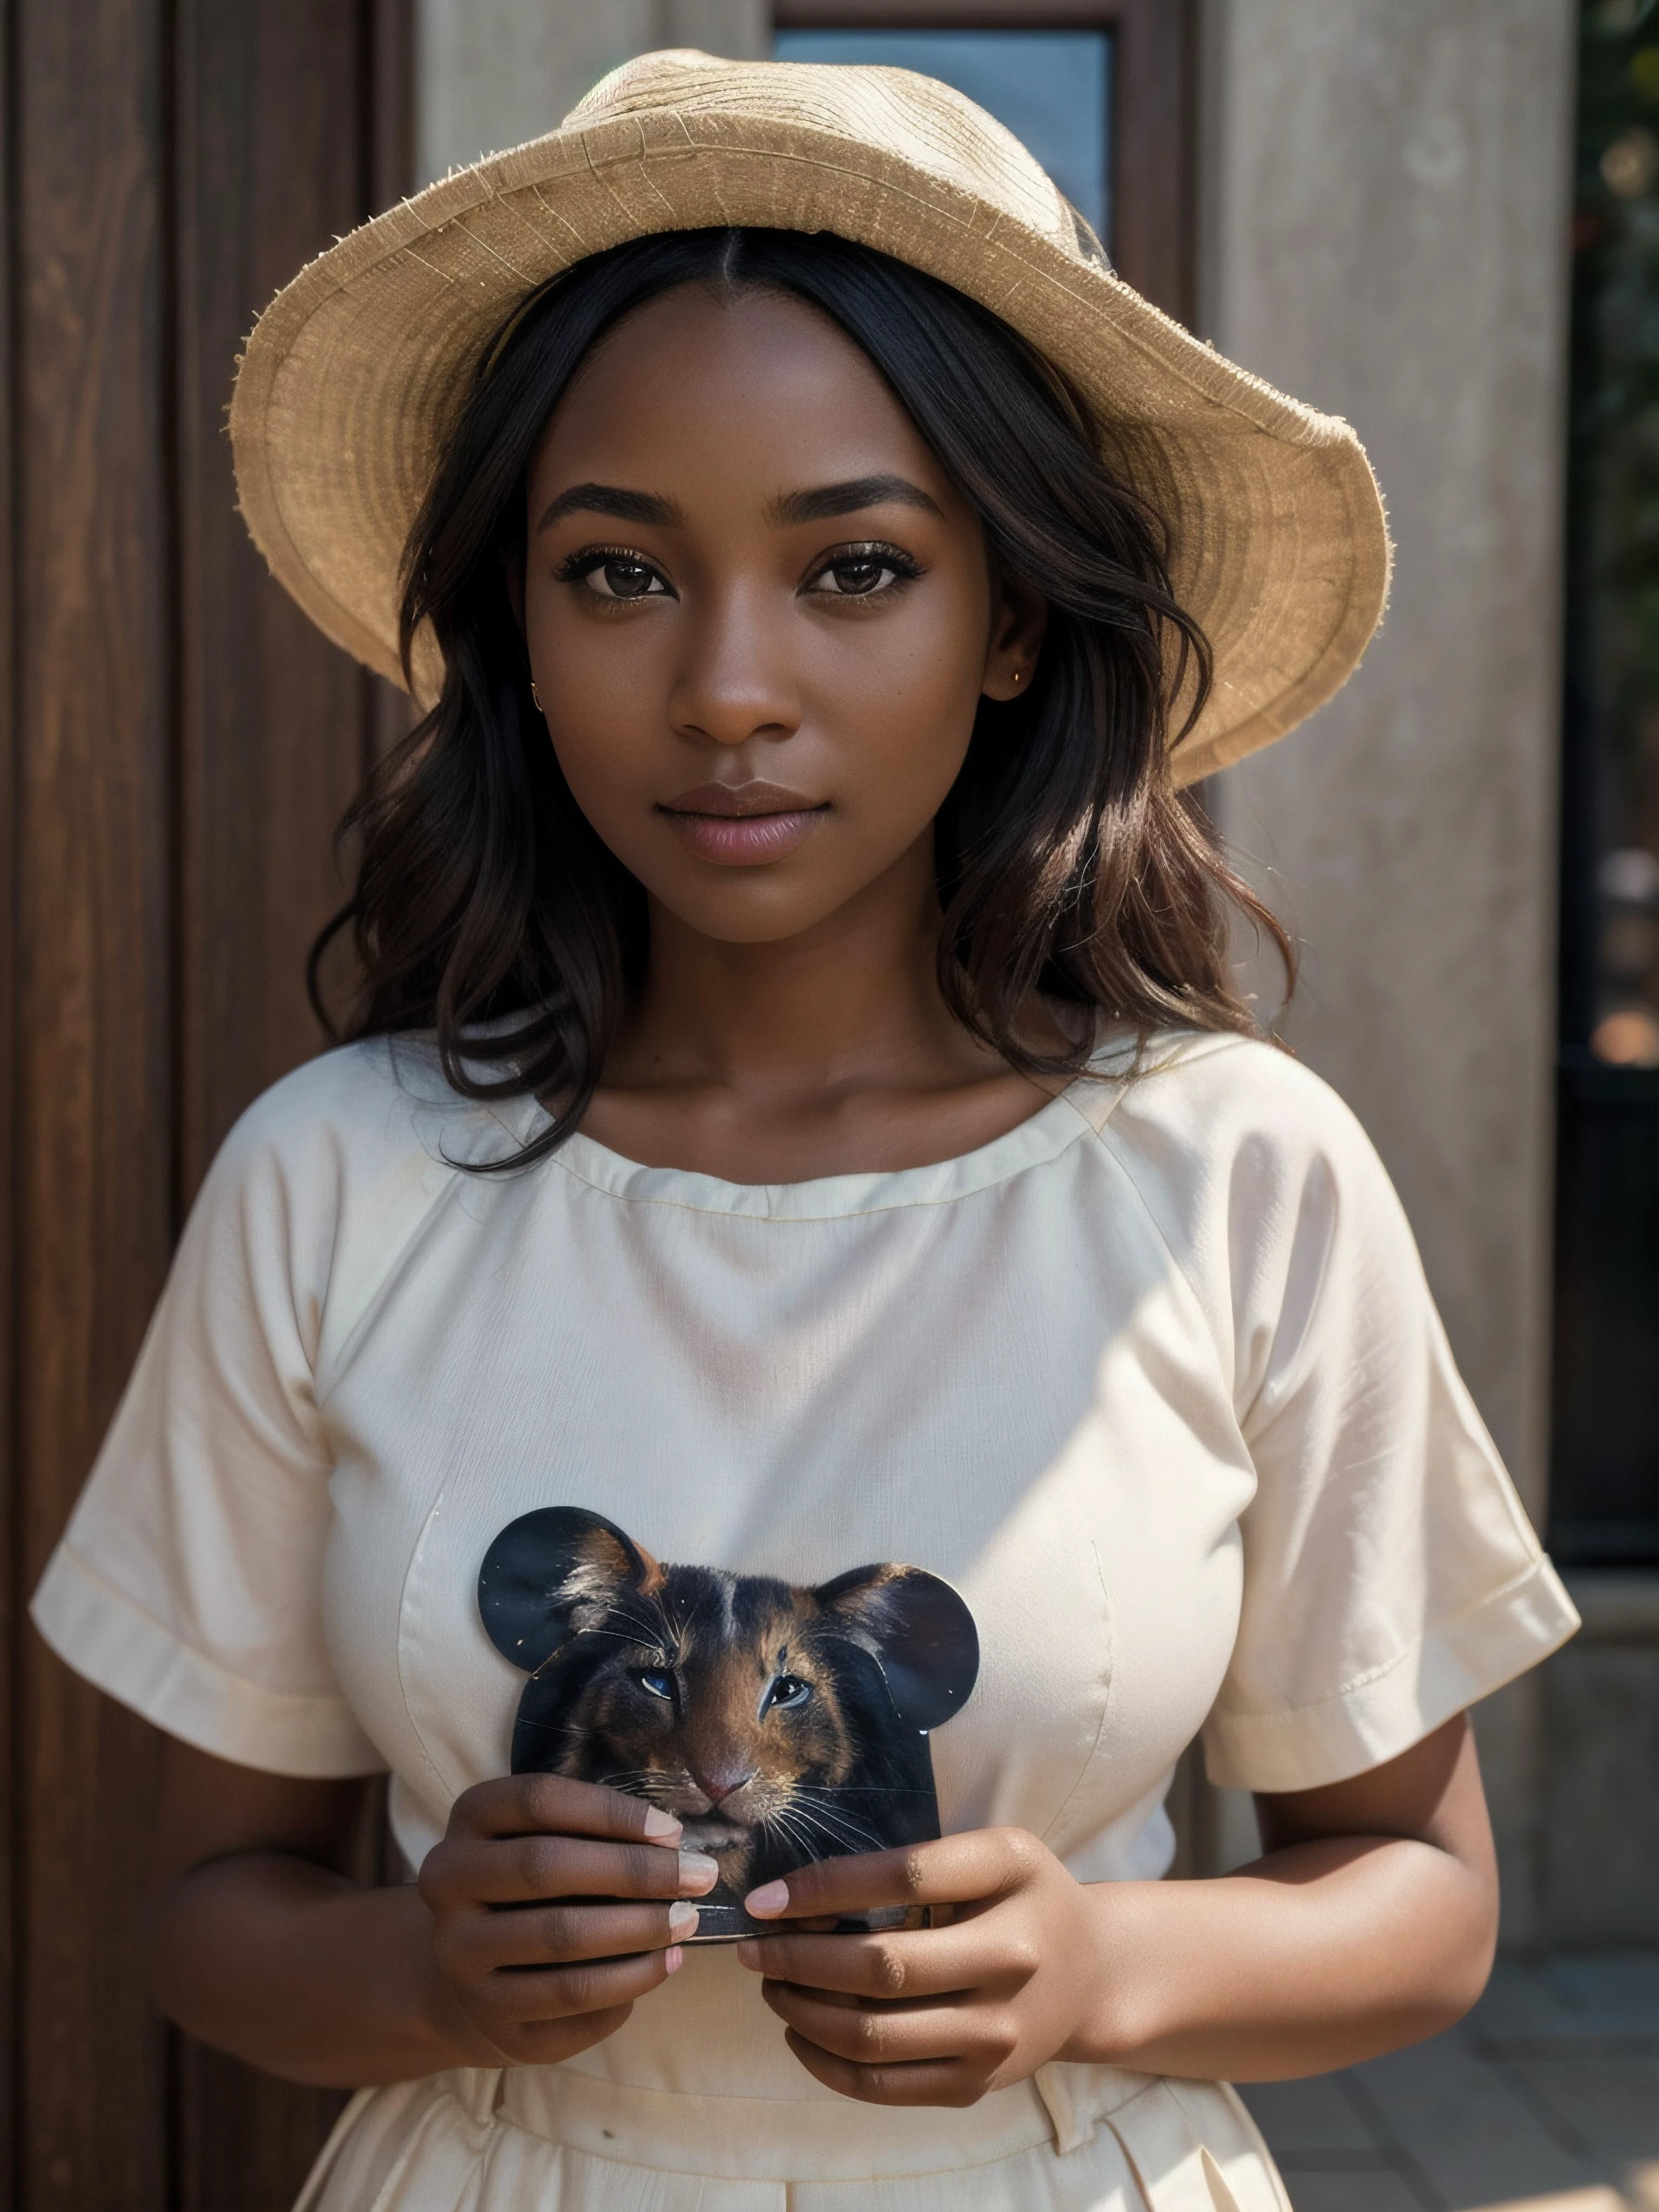 Hyperrealistic art of stunning image of a cute adorable happy Mouse with a hat holding a letter for you, doorstep OverallDetail BREAK
girl , (establishing shot:1.5), ethiopia, skin color ebony tone of skin (face:Triangular Oblong Face, Deep-Set Eyes, [eye color blue], Nose with an Acquiline Curve Shape, soft lip contours, round cheeks, round chin) dark blonde, (ultra detailed eyes and face)dramatic, (masterpiece, best quality, high quality), hyperdetailed, highres, intricate detail, HDR, 8k, sharp focus, detailed background, extremely detailed face eyes lips nose, perfect hands, realistic eyes, detailed skin texture, subsurface scattering, realistic, temple, dark, photorealistic,, Extremely high-resolution details, photographic, realism pushed to extreme, fine texture, incredibly lifelike